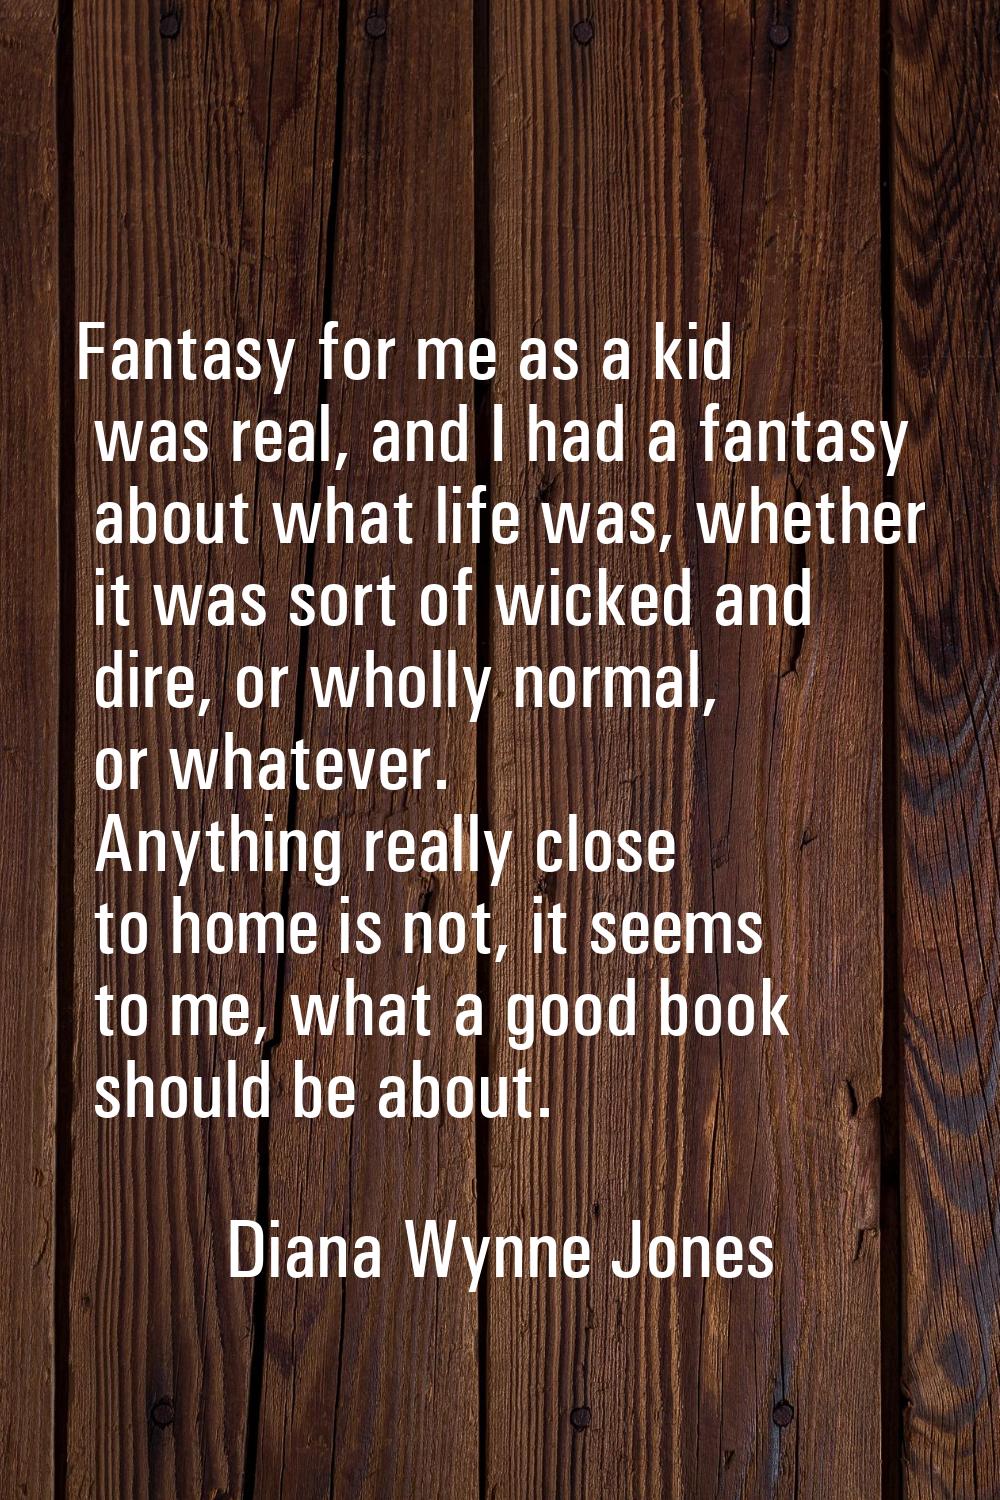 Fantasy for me as a kid was real, and I had a fantasy about what life was, whether it was sort of w